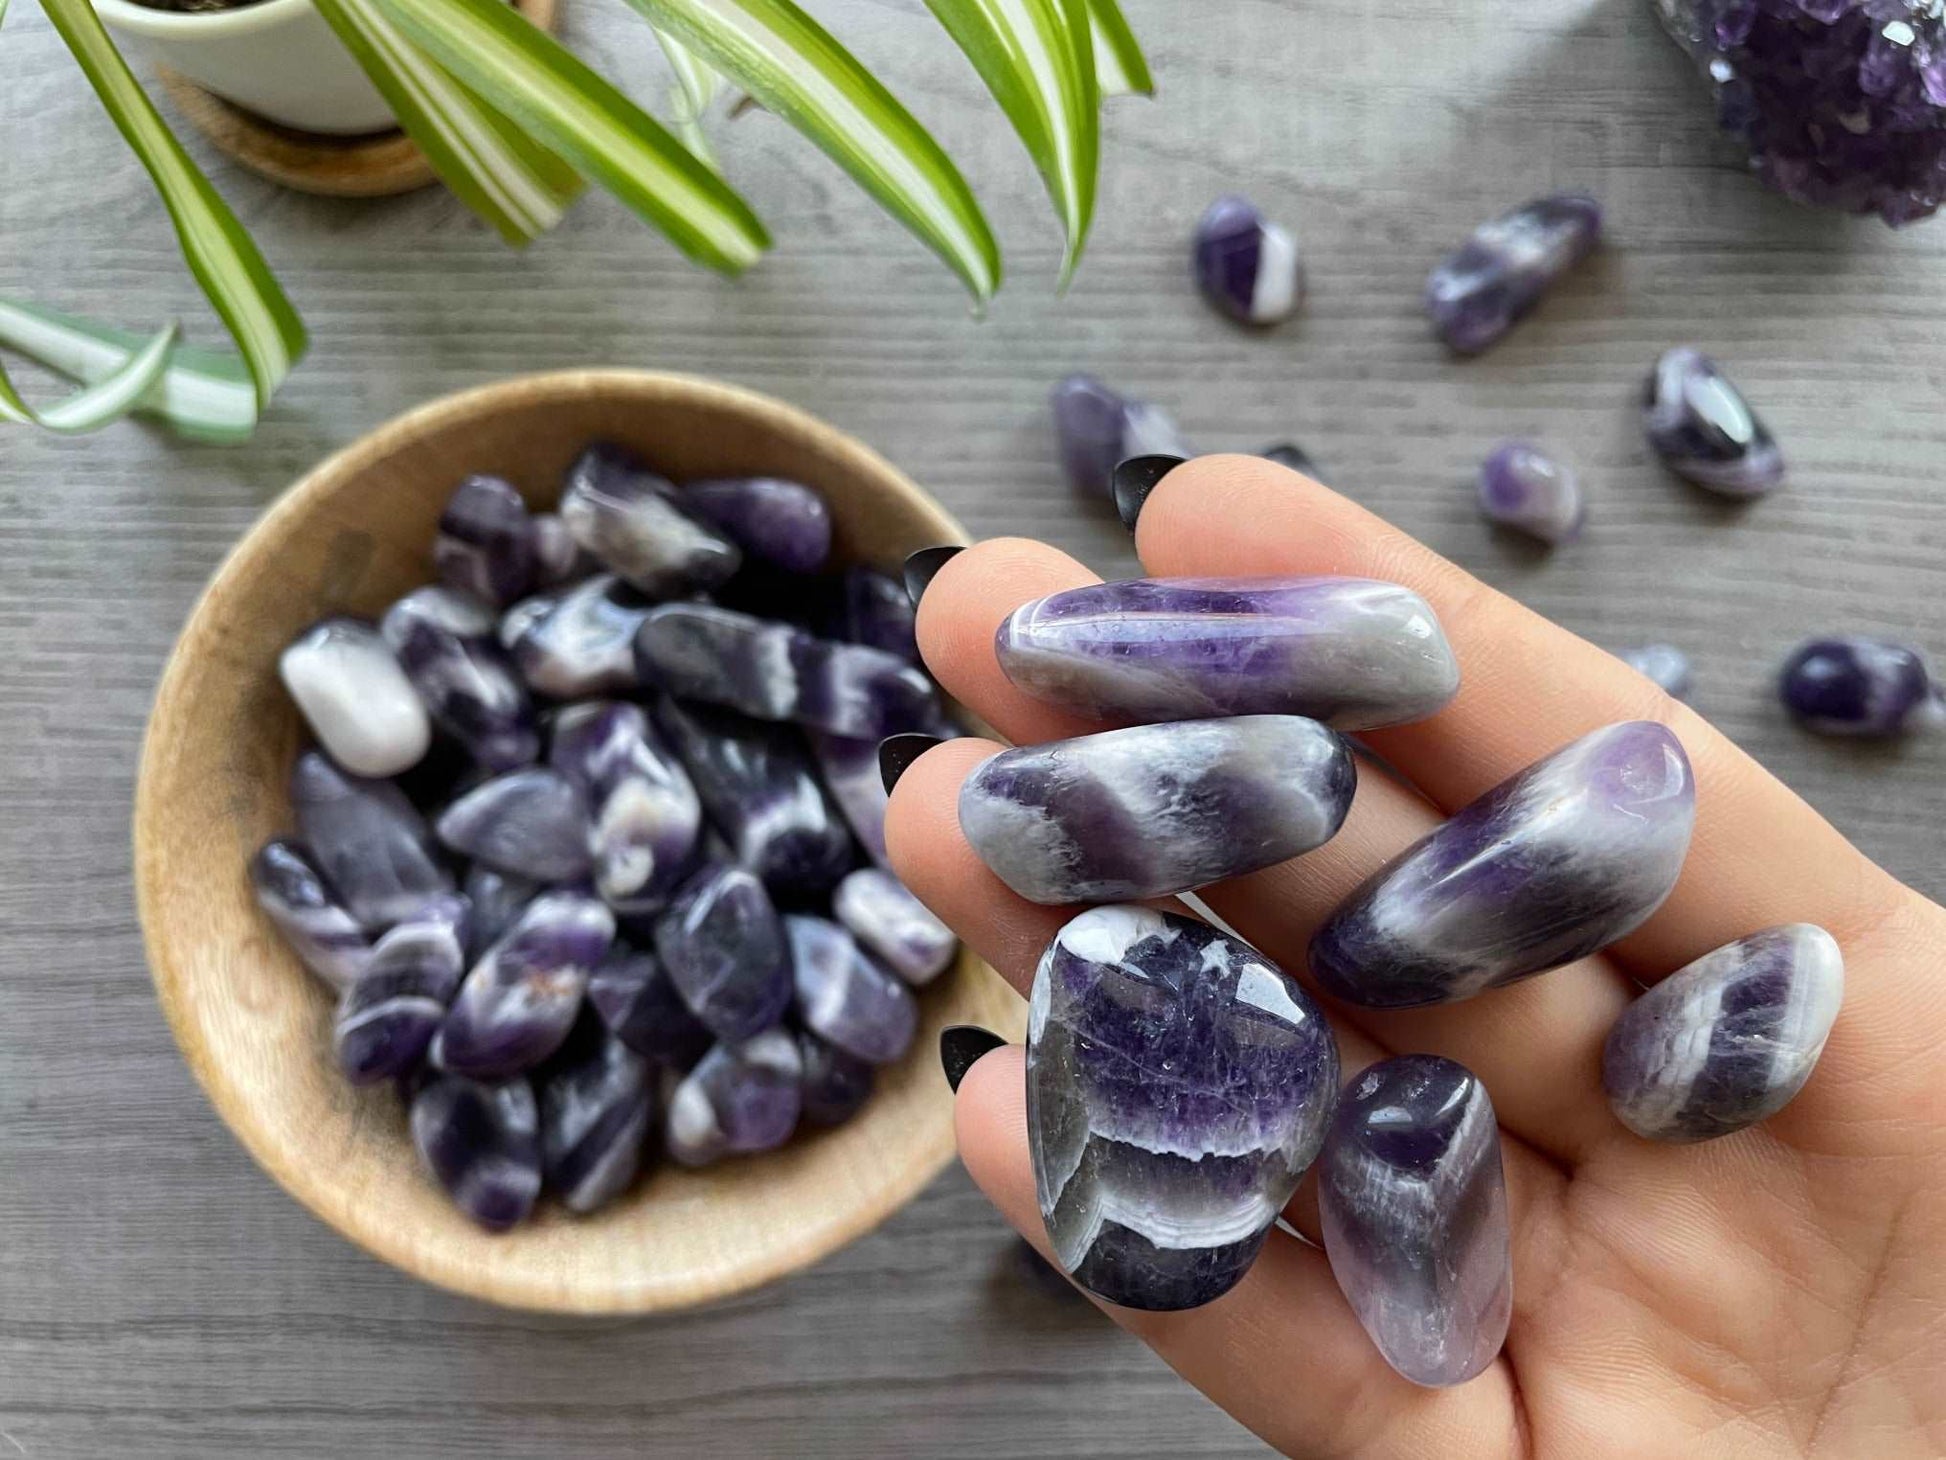 Pictured are various chevron amethyst tumbled stones.